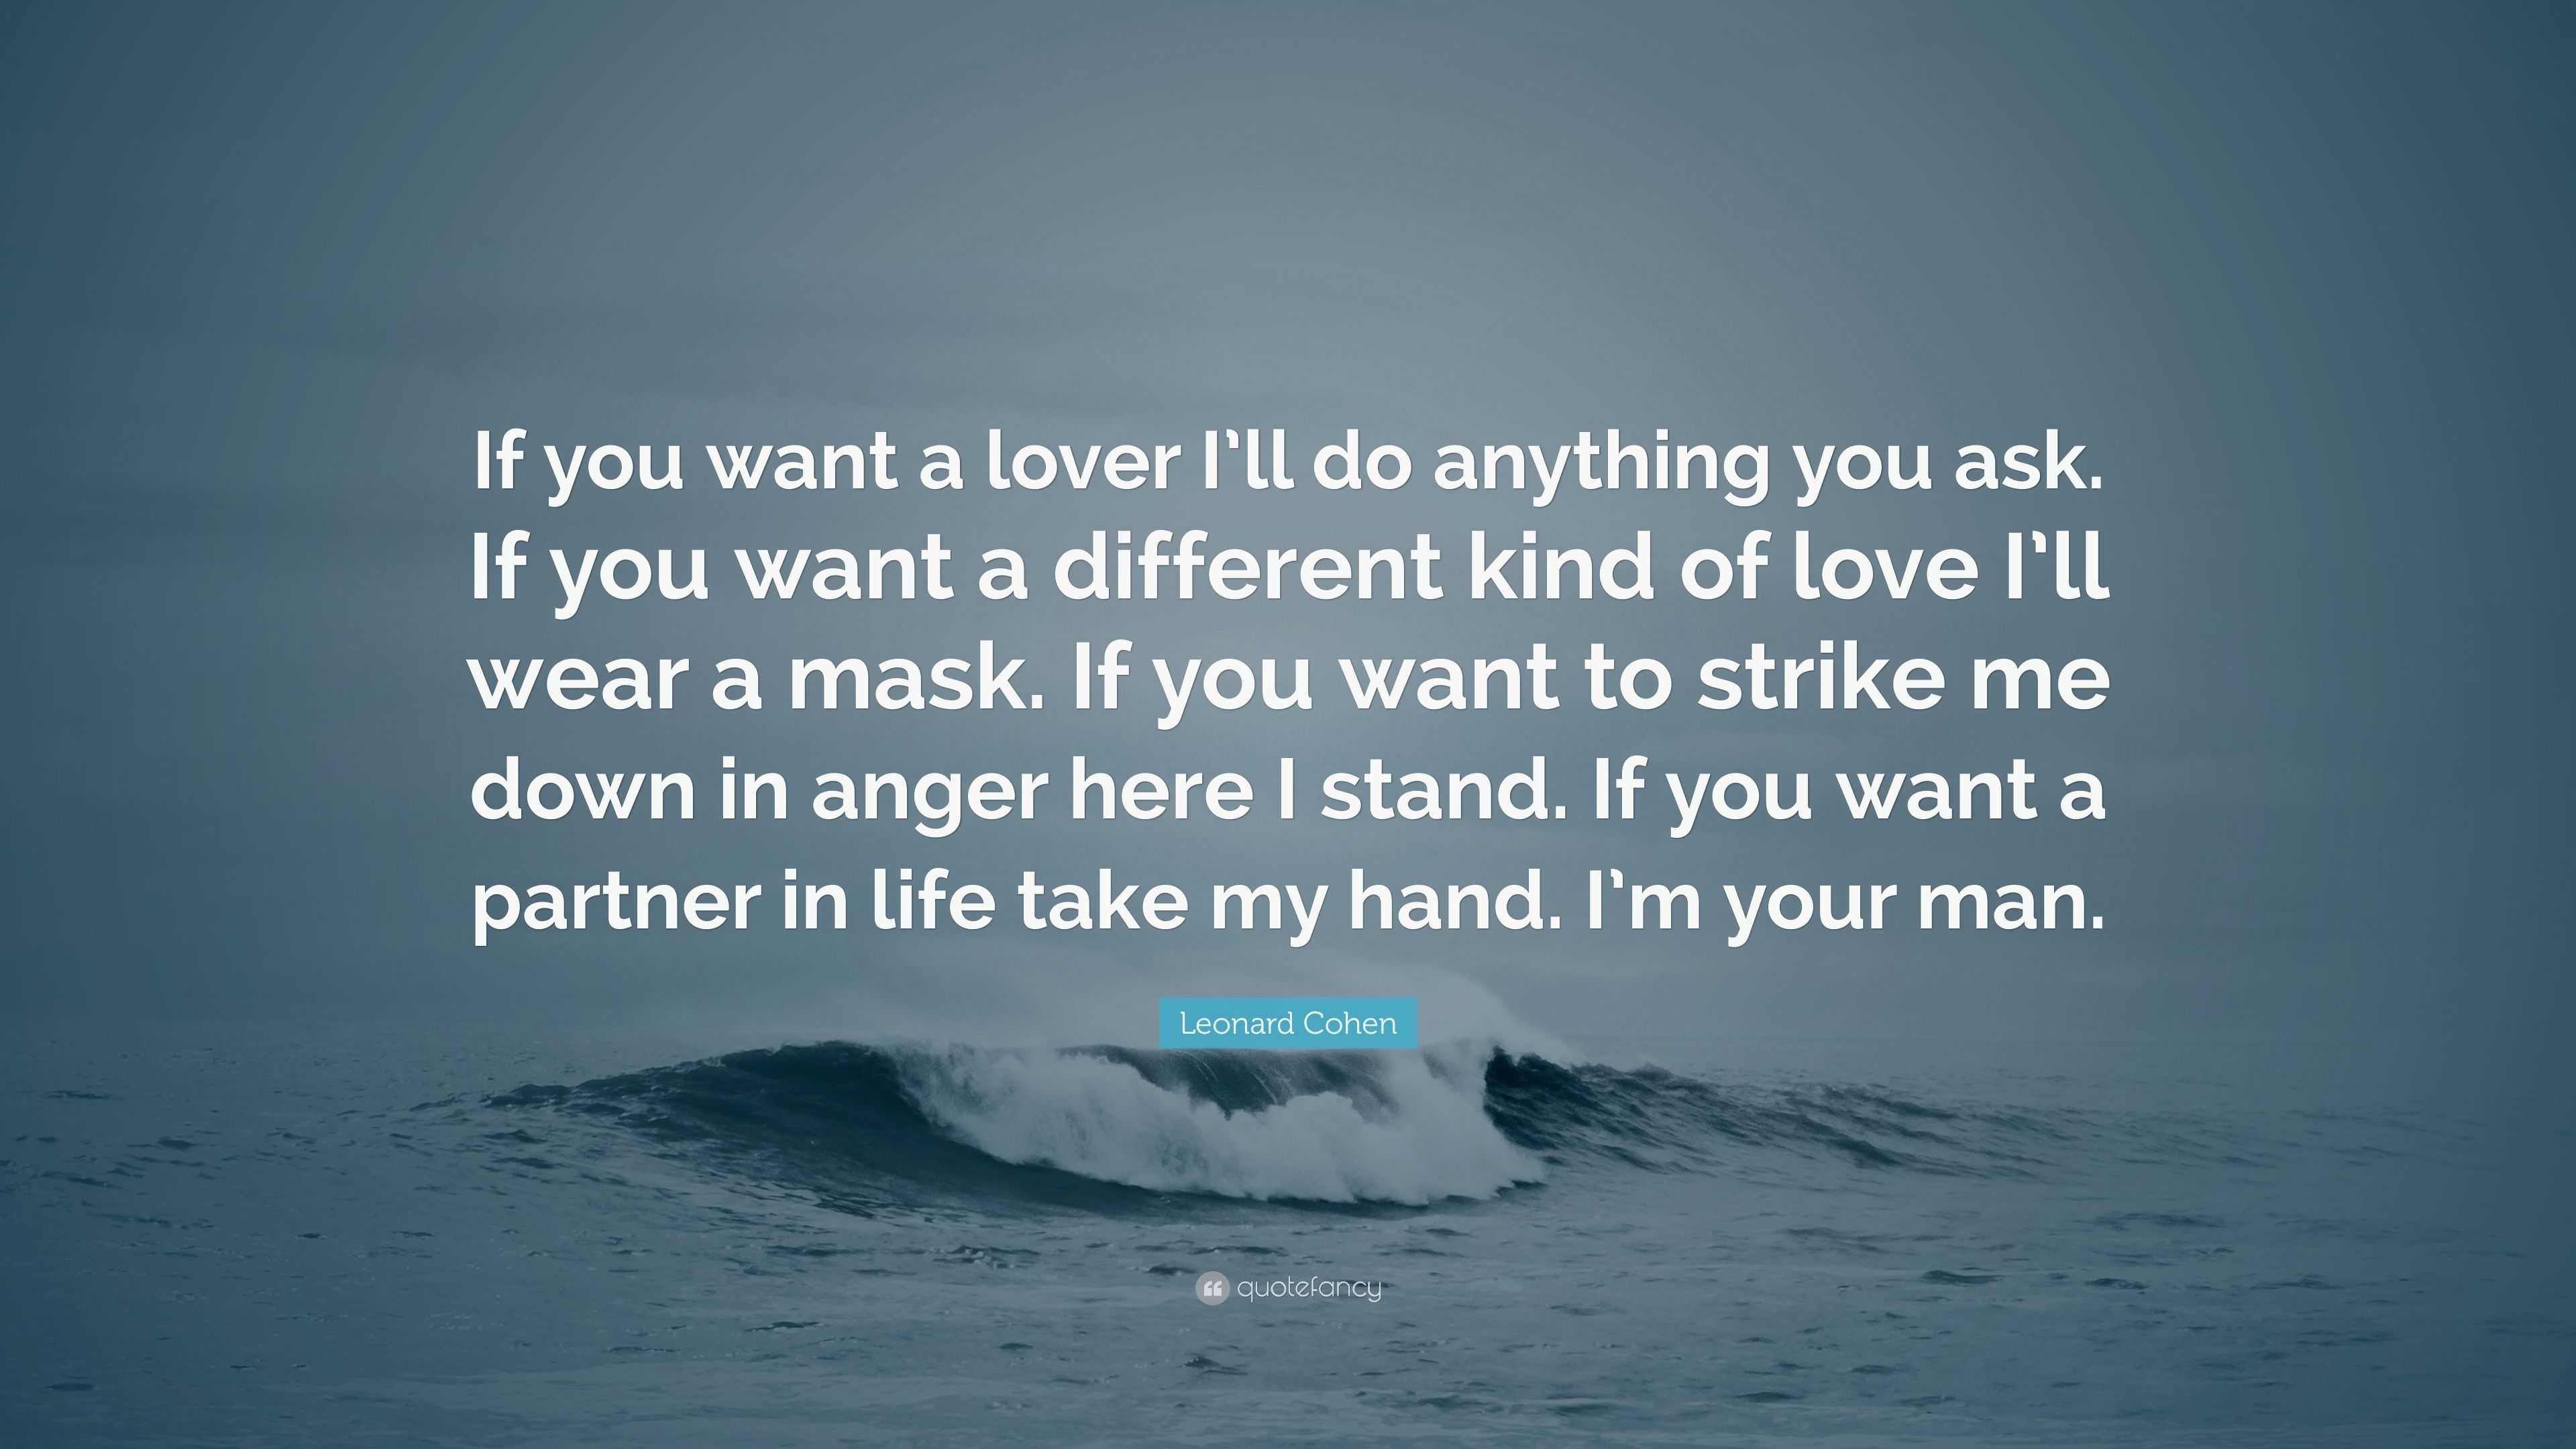 Leonard Cohen Quote “If you want a lover I ll do anything you